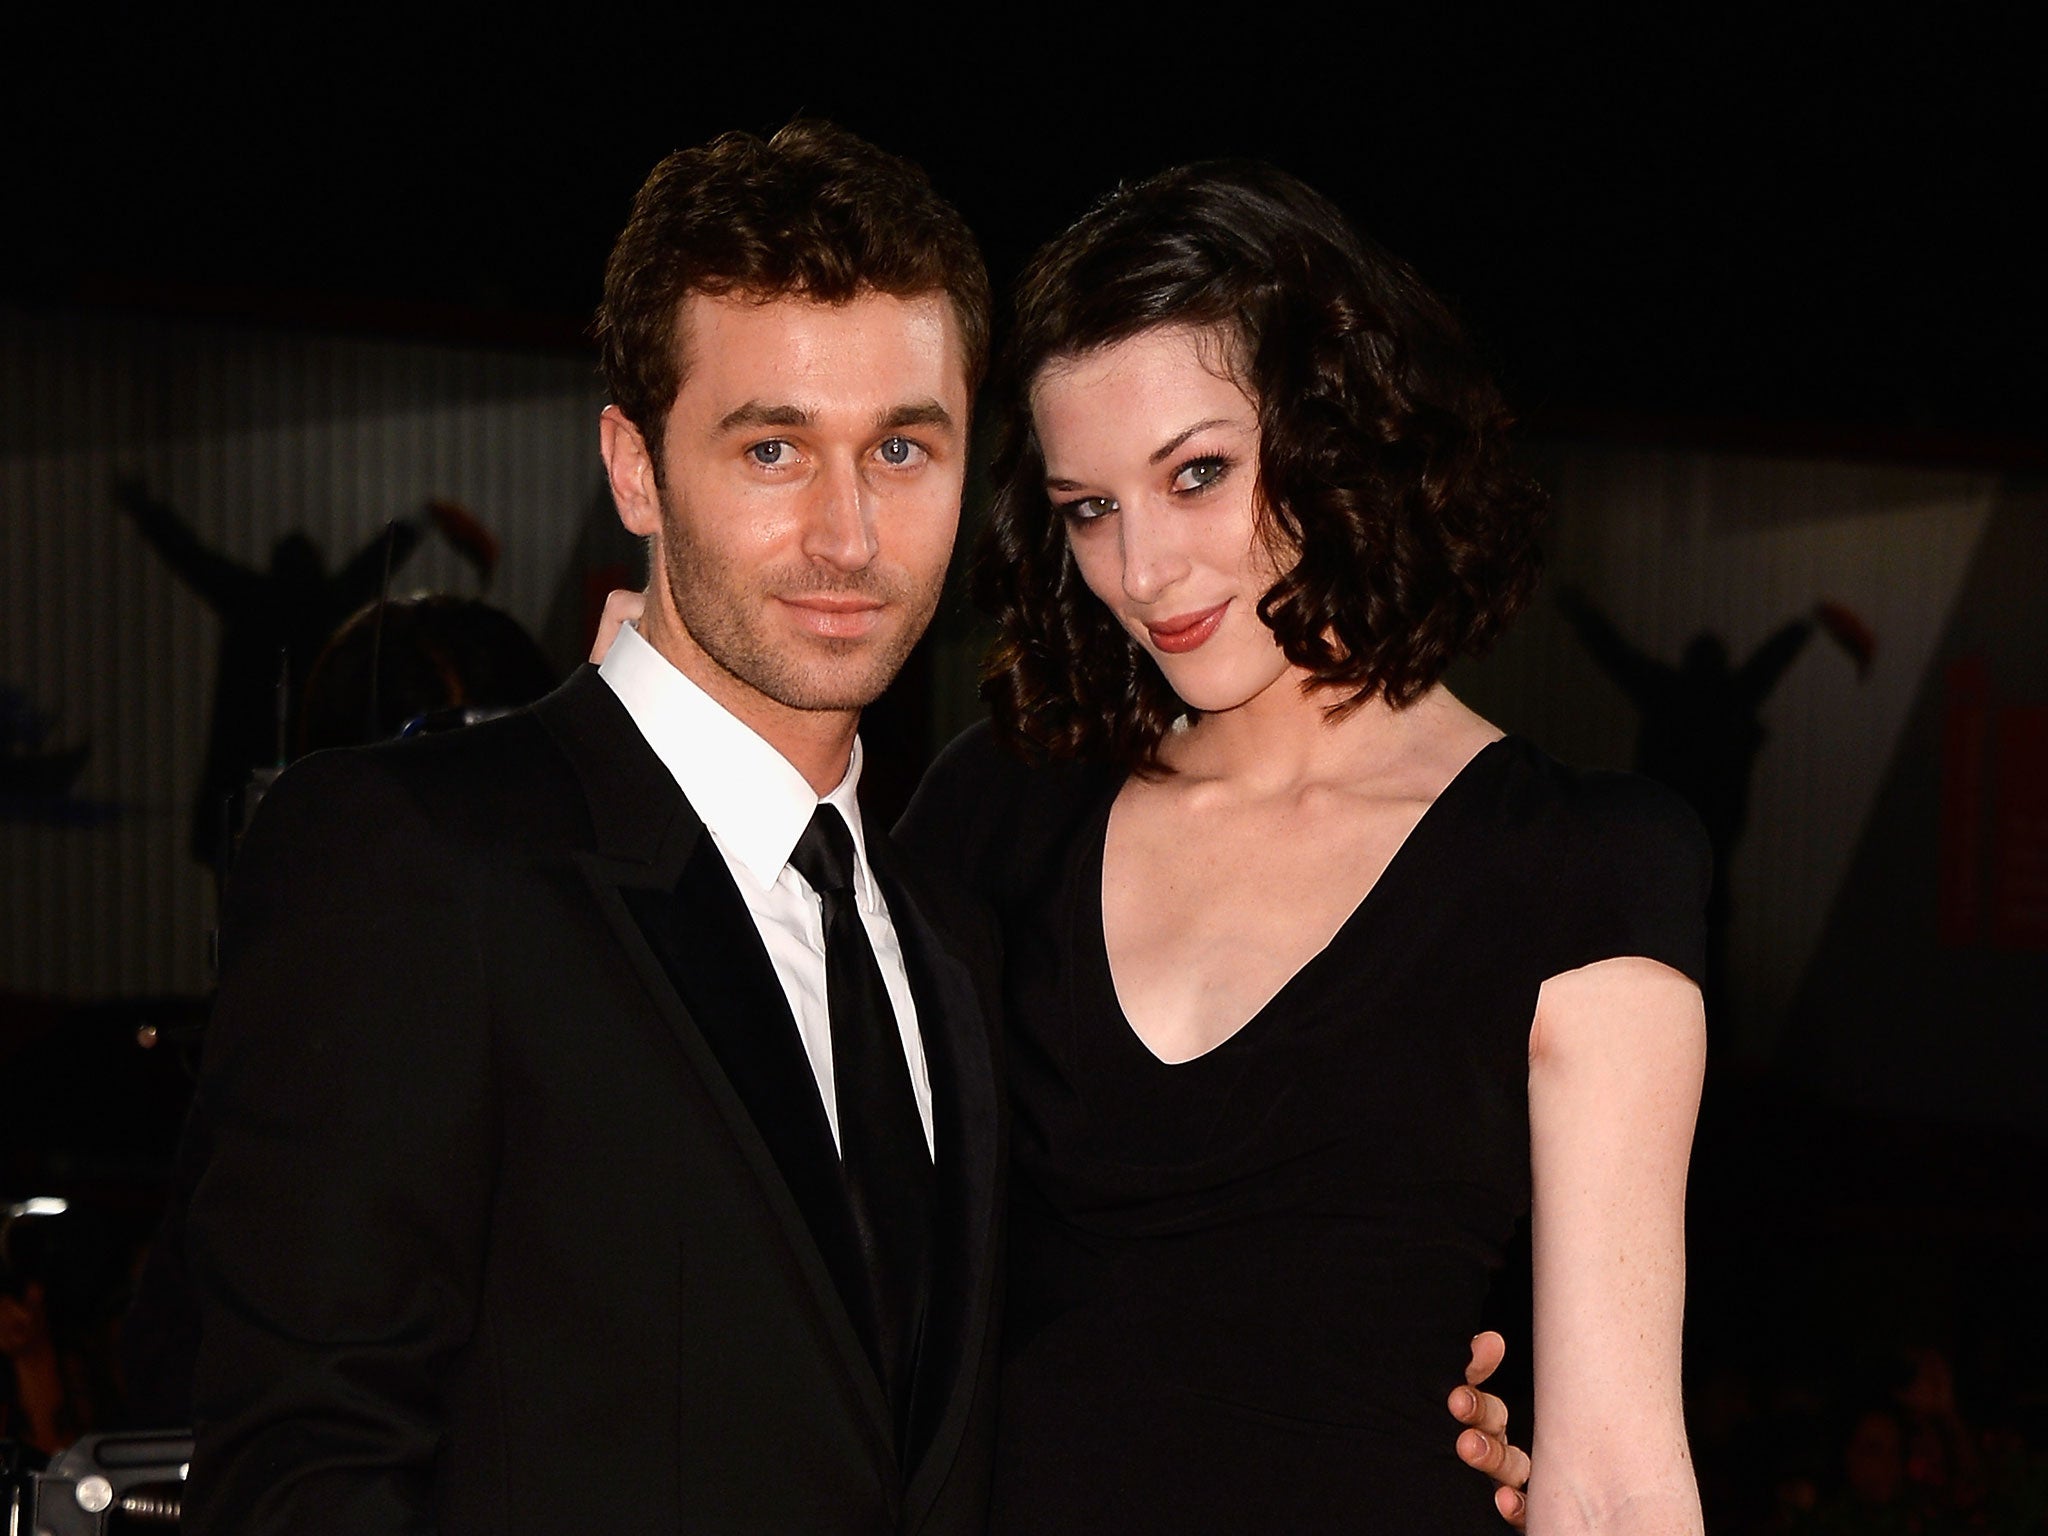 Hd Rapes Urdu Sex Movies - James Deen dropped by adult film companies after allegations of rape and  sexual assault | The Independent | The Independent